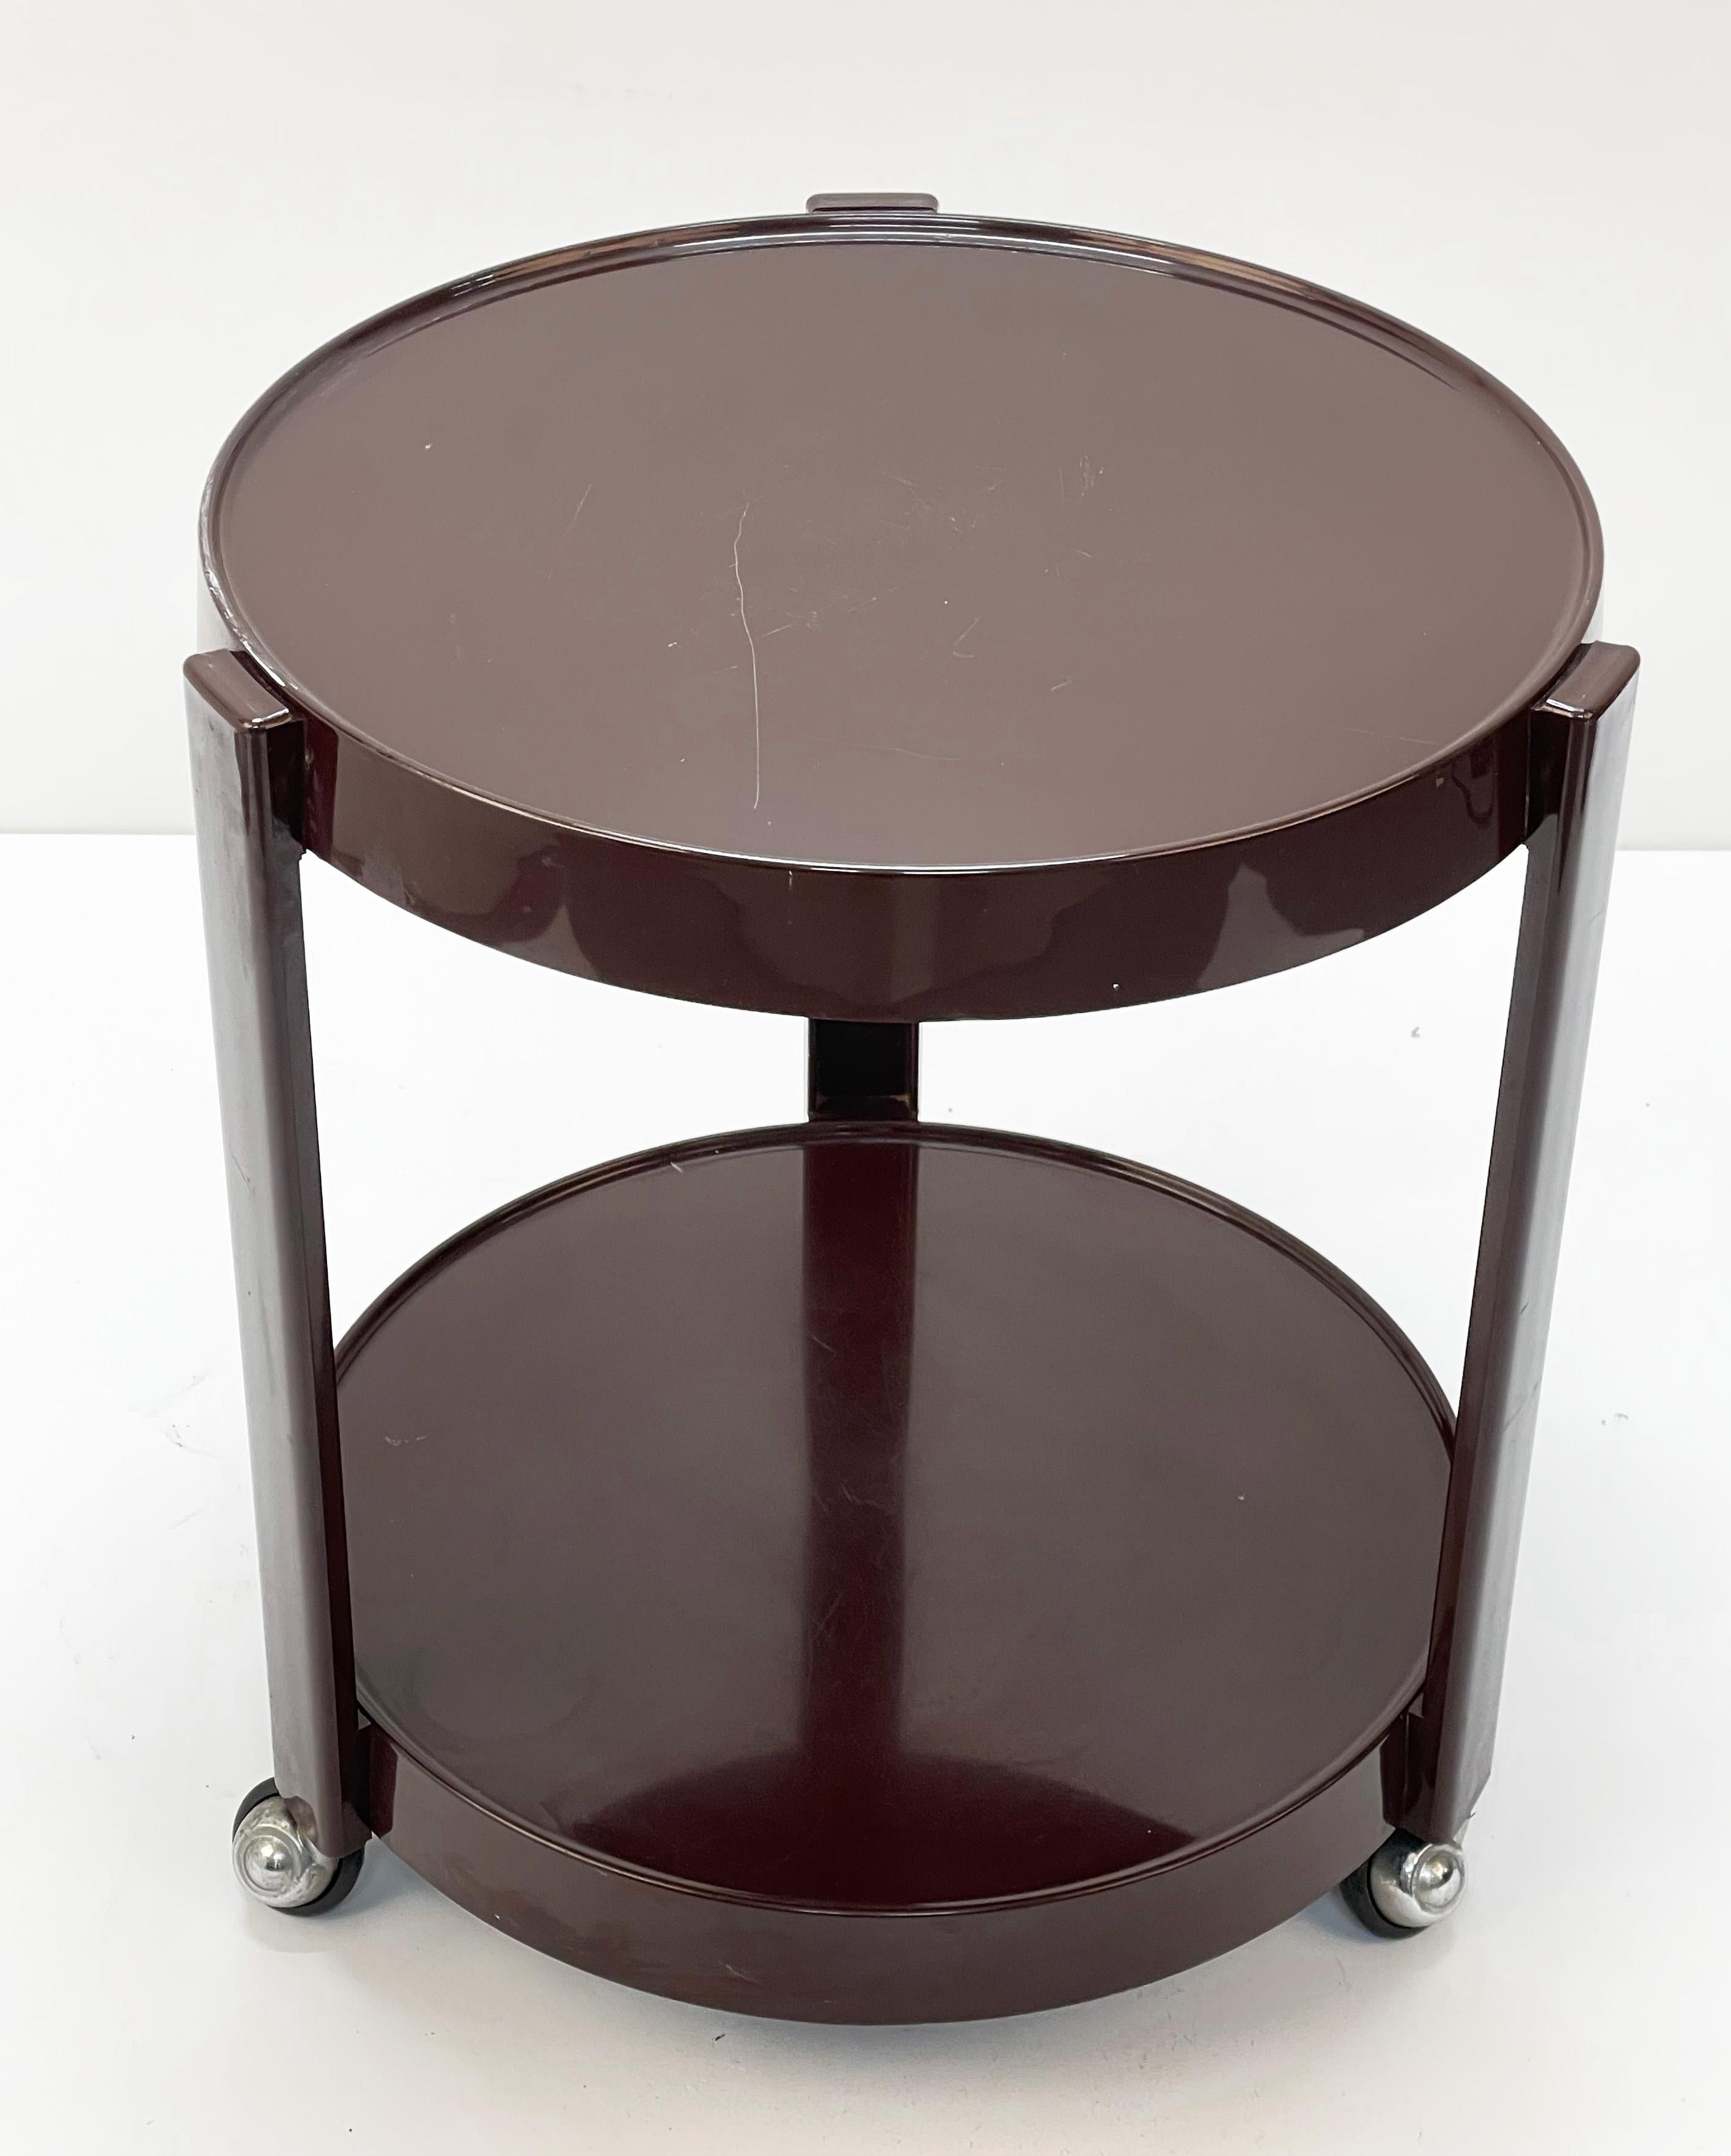 Midcentury Brown Plastic Round Italian Bar Cart with Two Shelves, 1970s For Sale 4